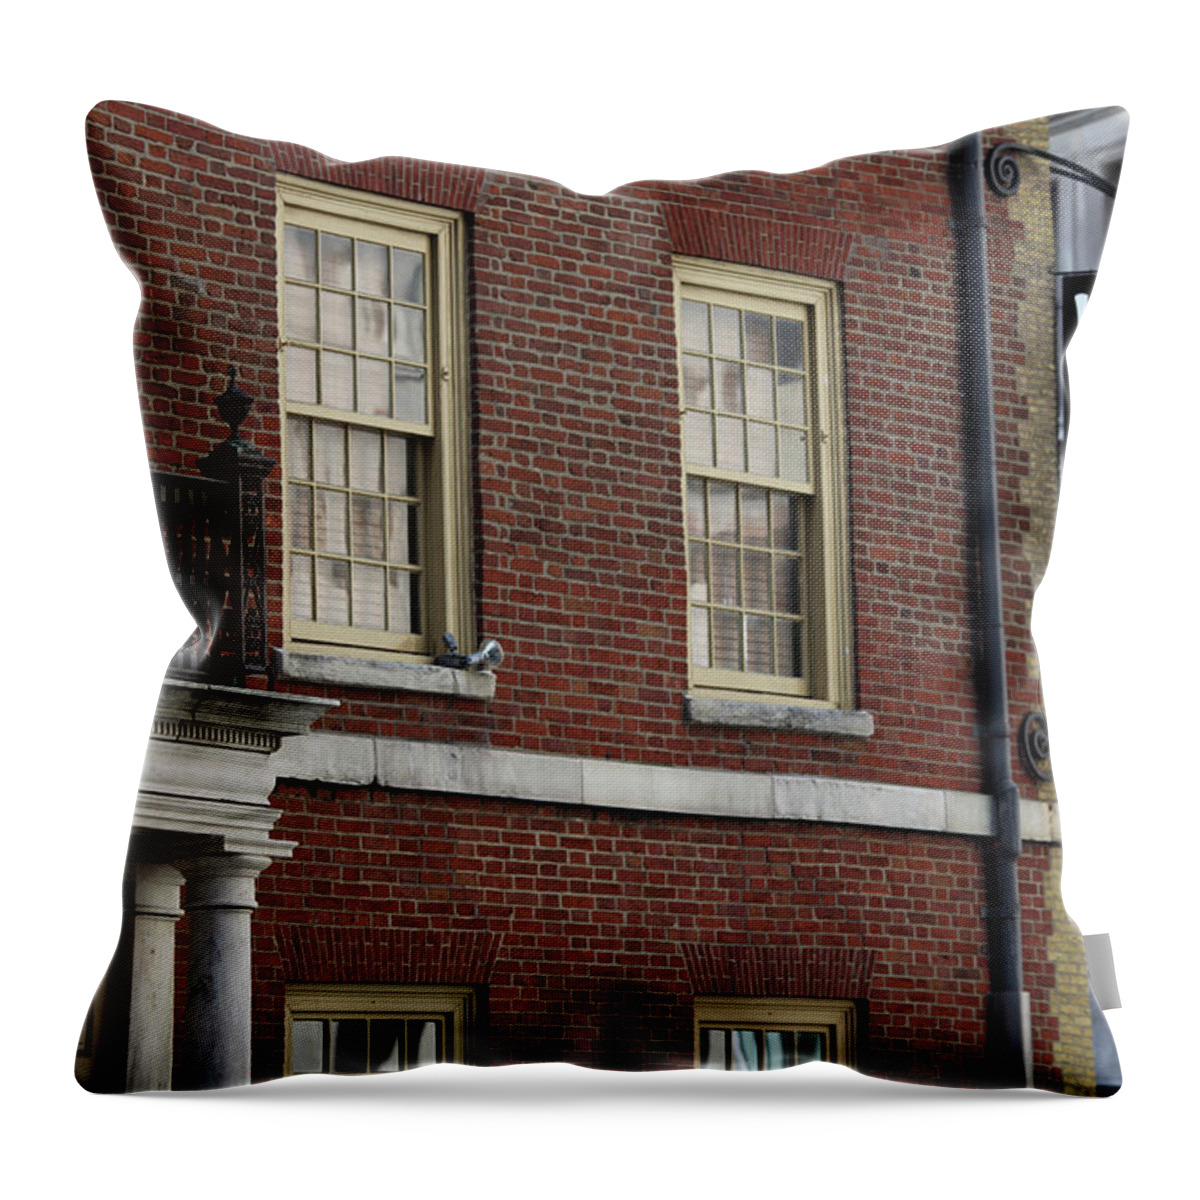 Fraunces Tavern Throw Pillow featuring the photograph Fraunces Tavern by Mark Alesse